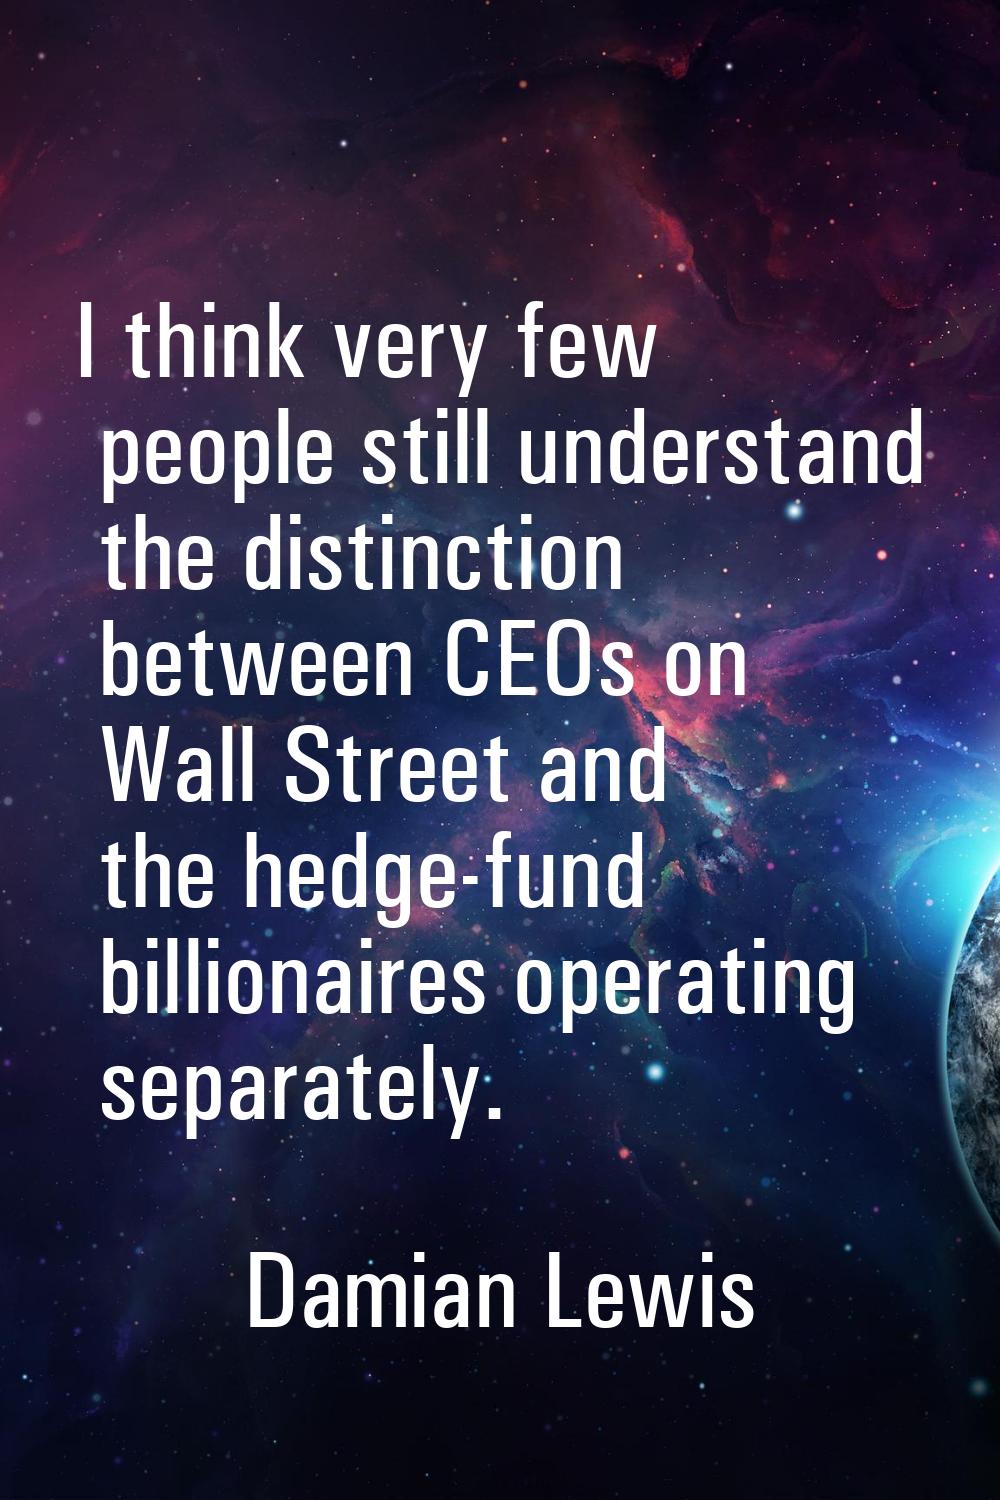 I think very few people still understand the distinction between CEOs on Wall Street and the hedge-